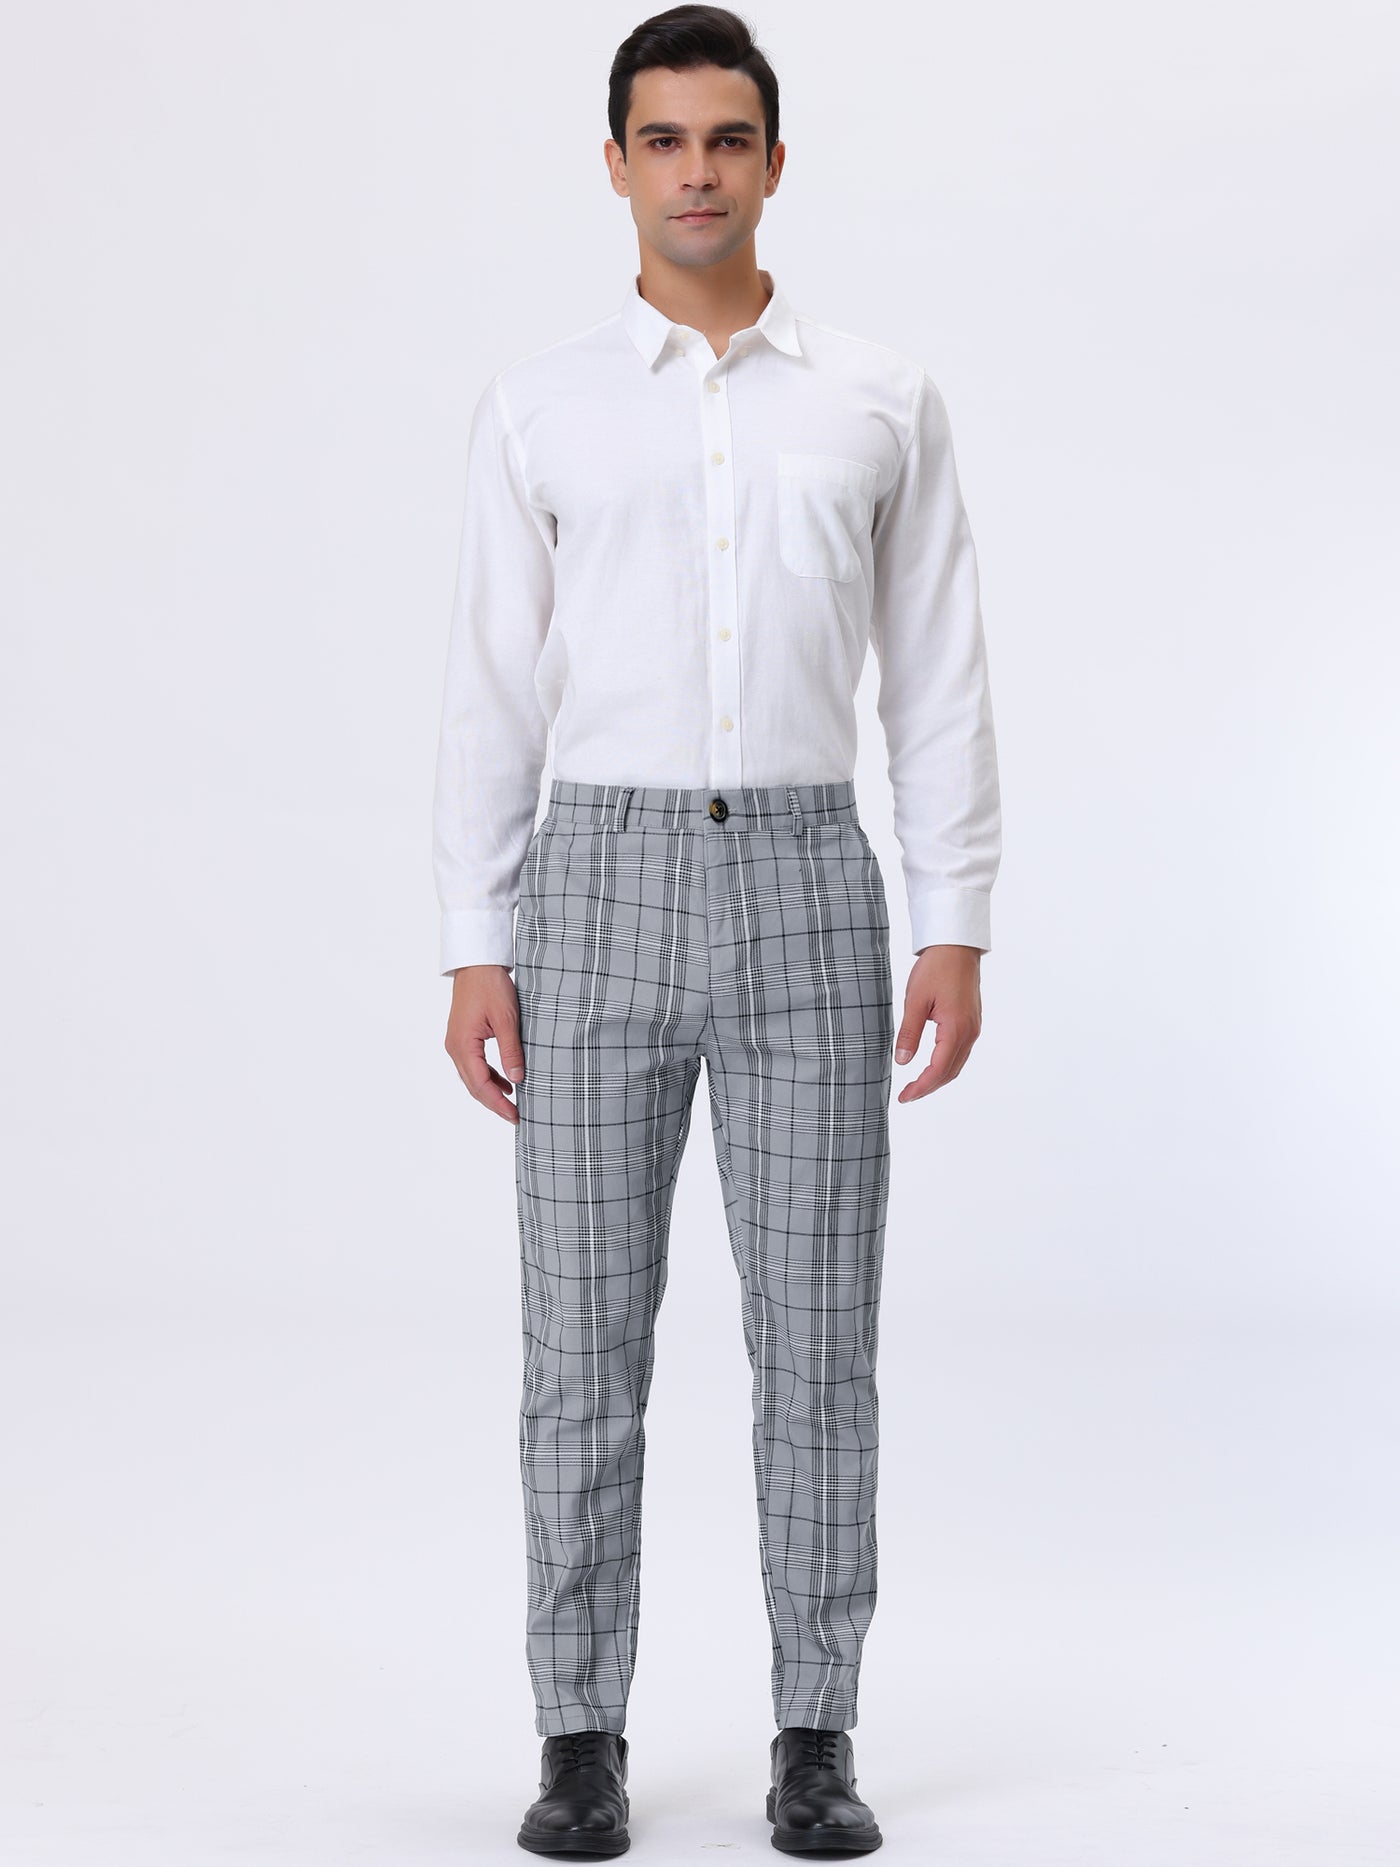 Bublédon Men's Plaid Slim Fit Trousers Flat Front Casual Checked Printed Dress Pants